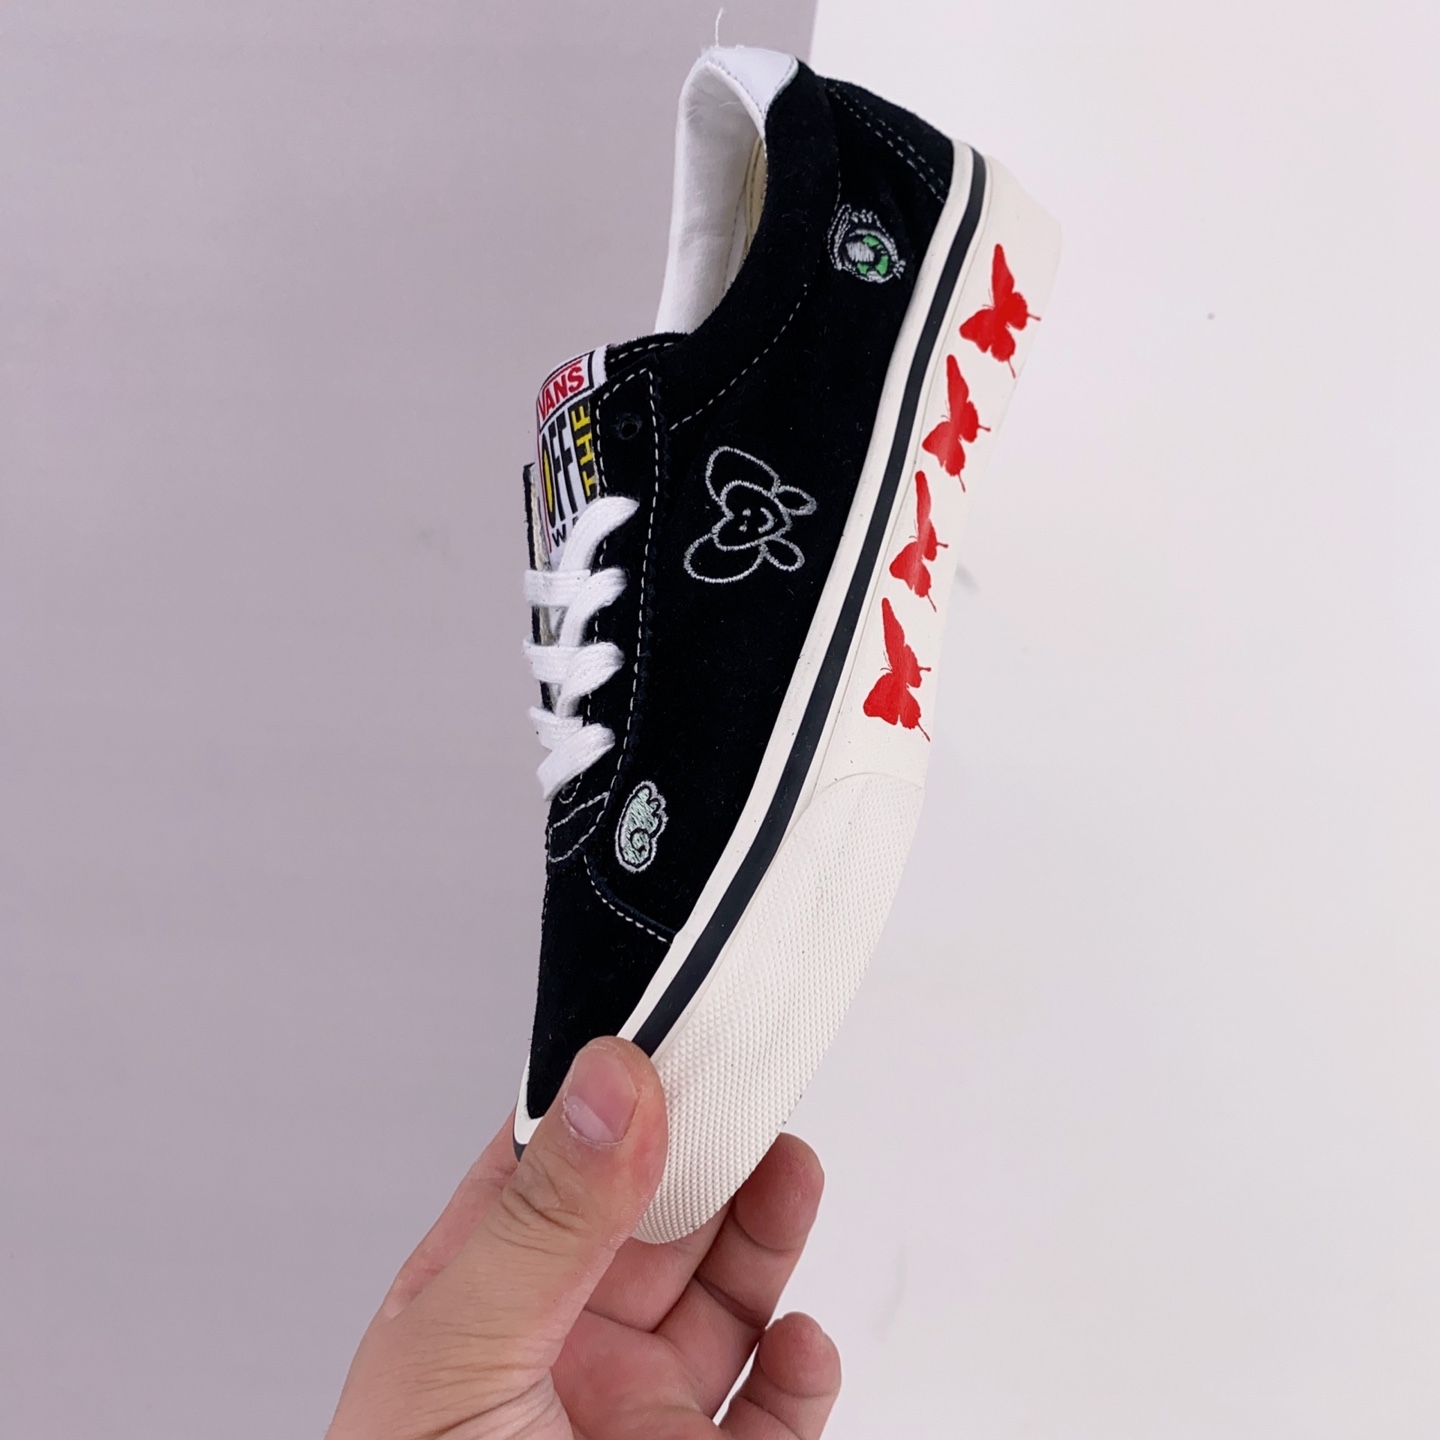 Vans x Sandy Liang Style 73 DX Sneakers – Trendy Collaboration for Fashion Forward Footwear